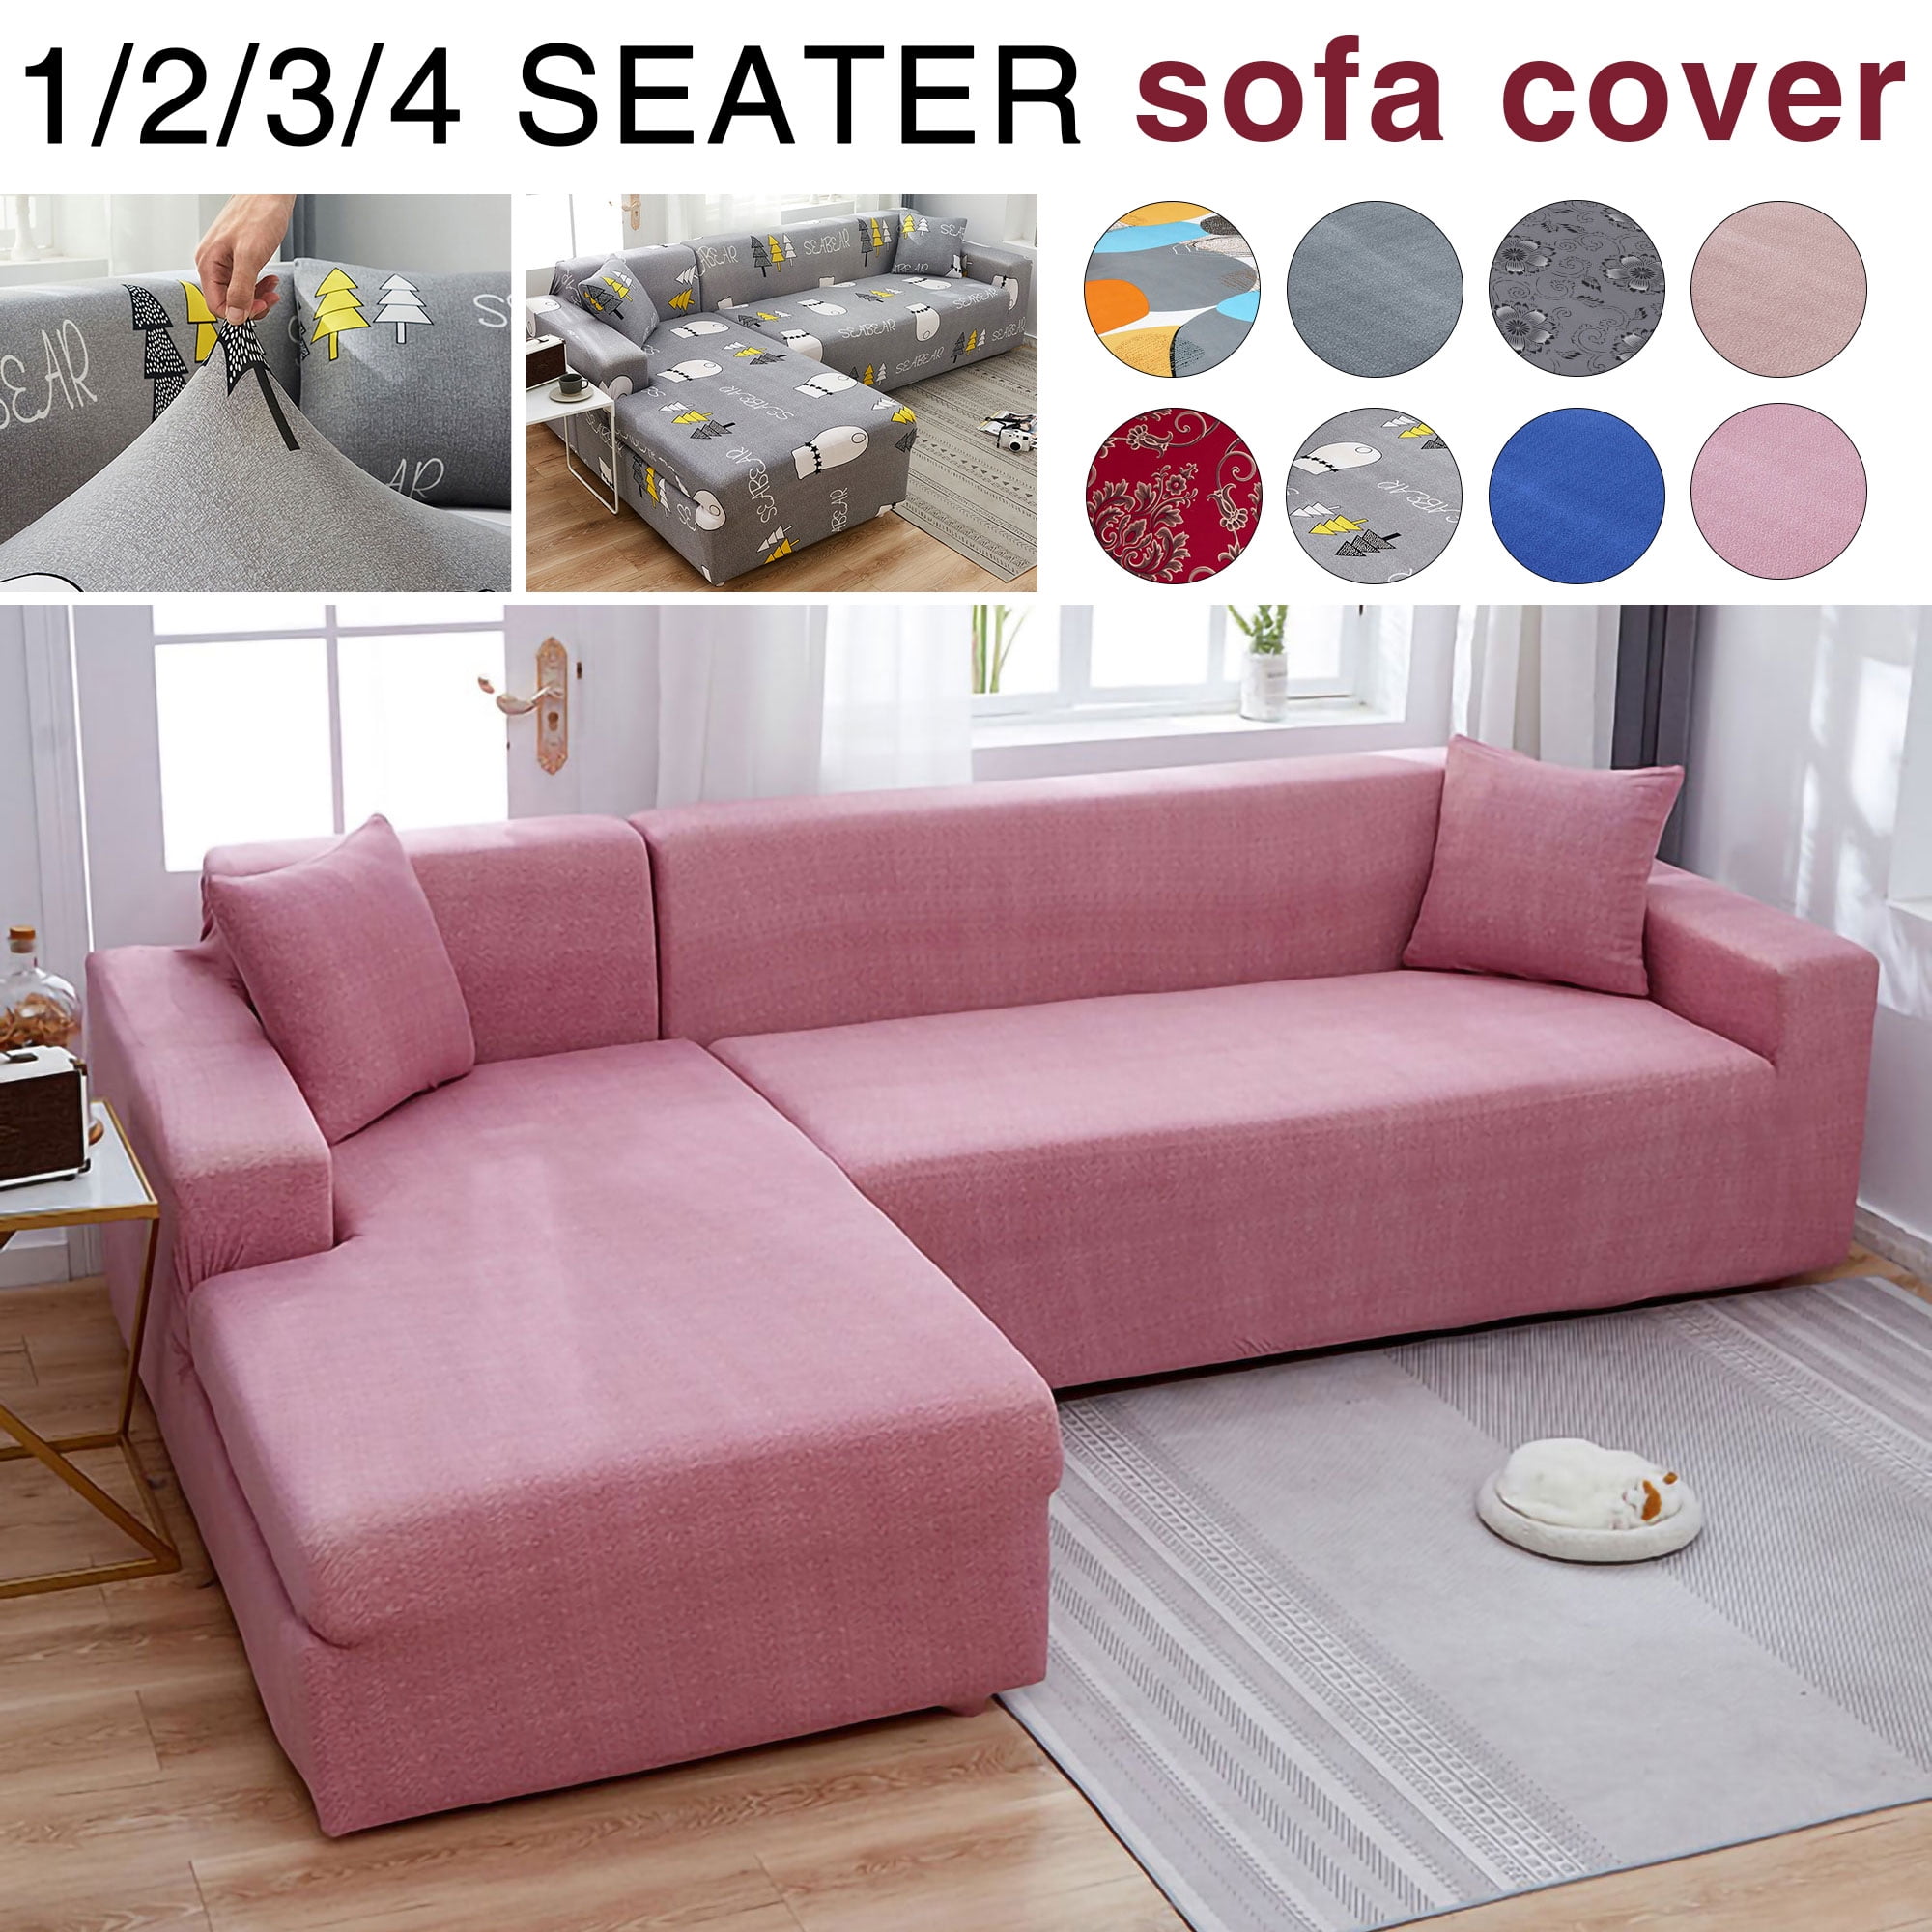 Sofa Cover L-Shape Universal Sectional Longue Slipcover Protect Stretch US STOCK 